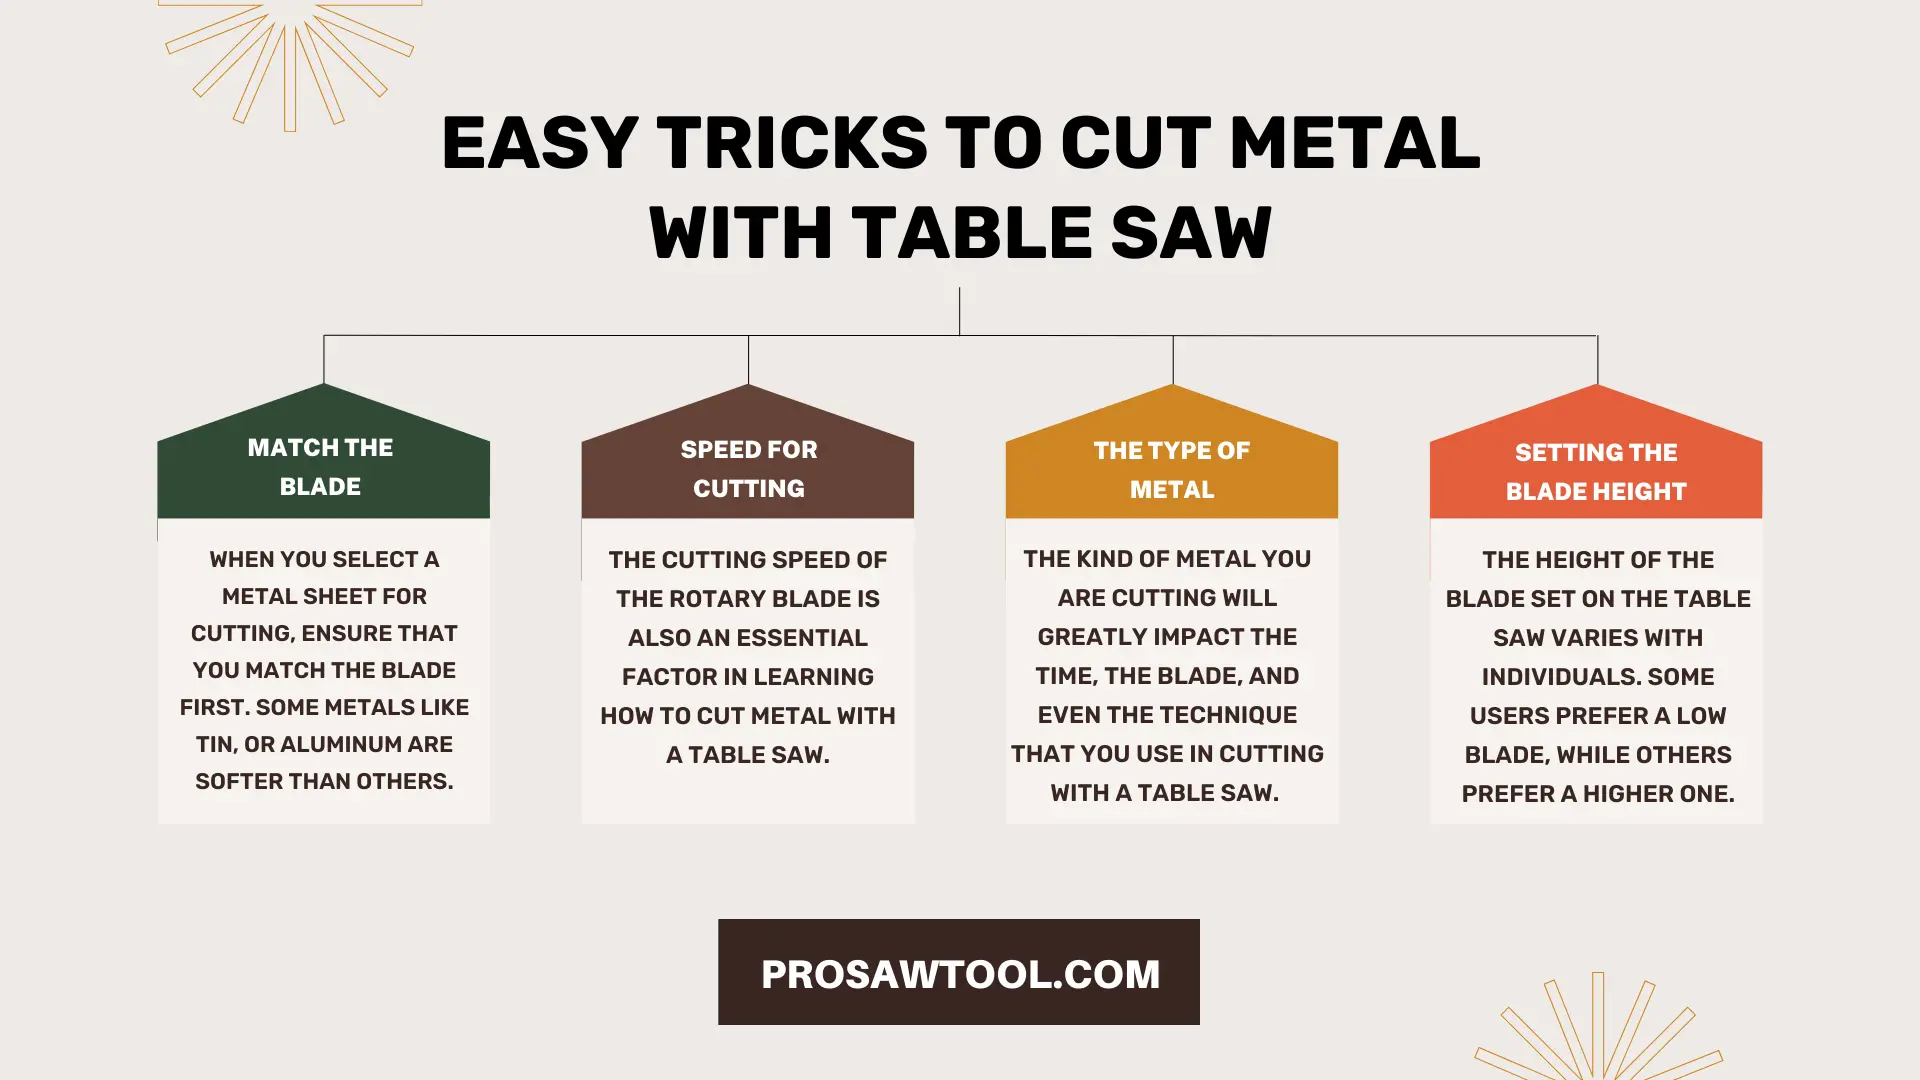 Easy tricks to cut metal with table saw